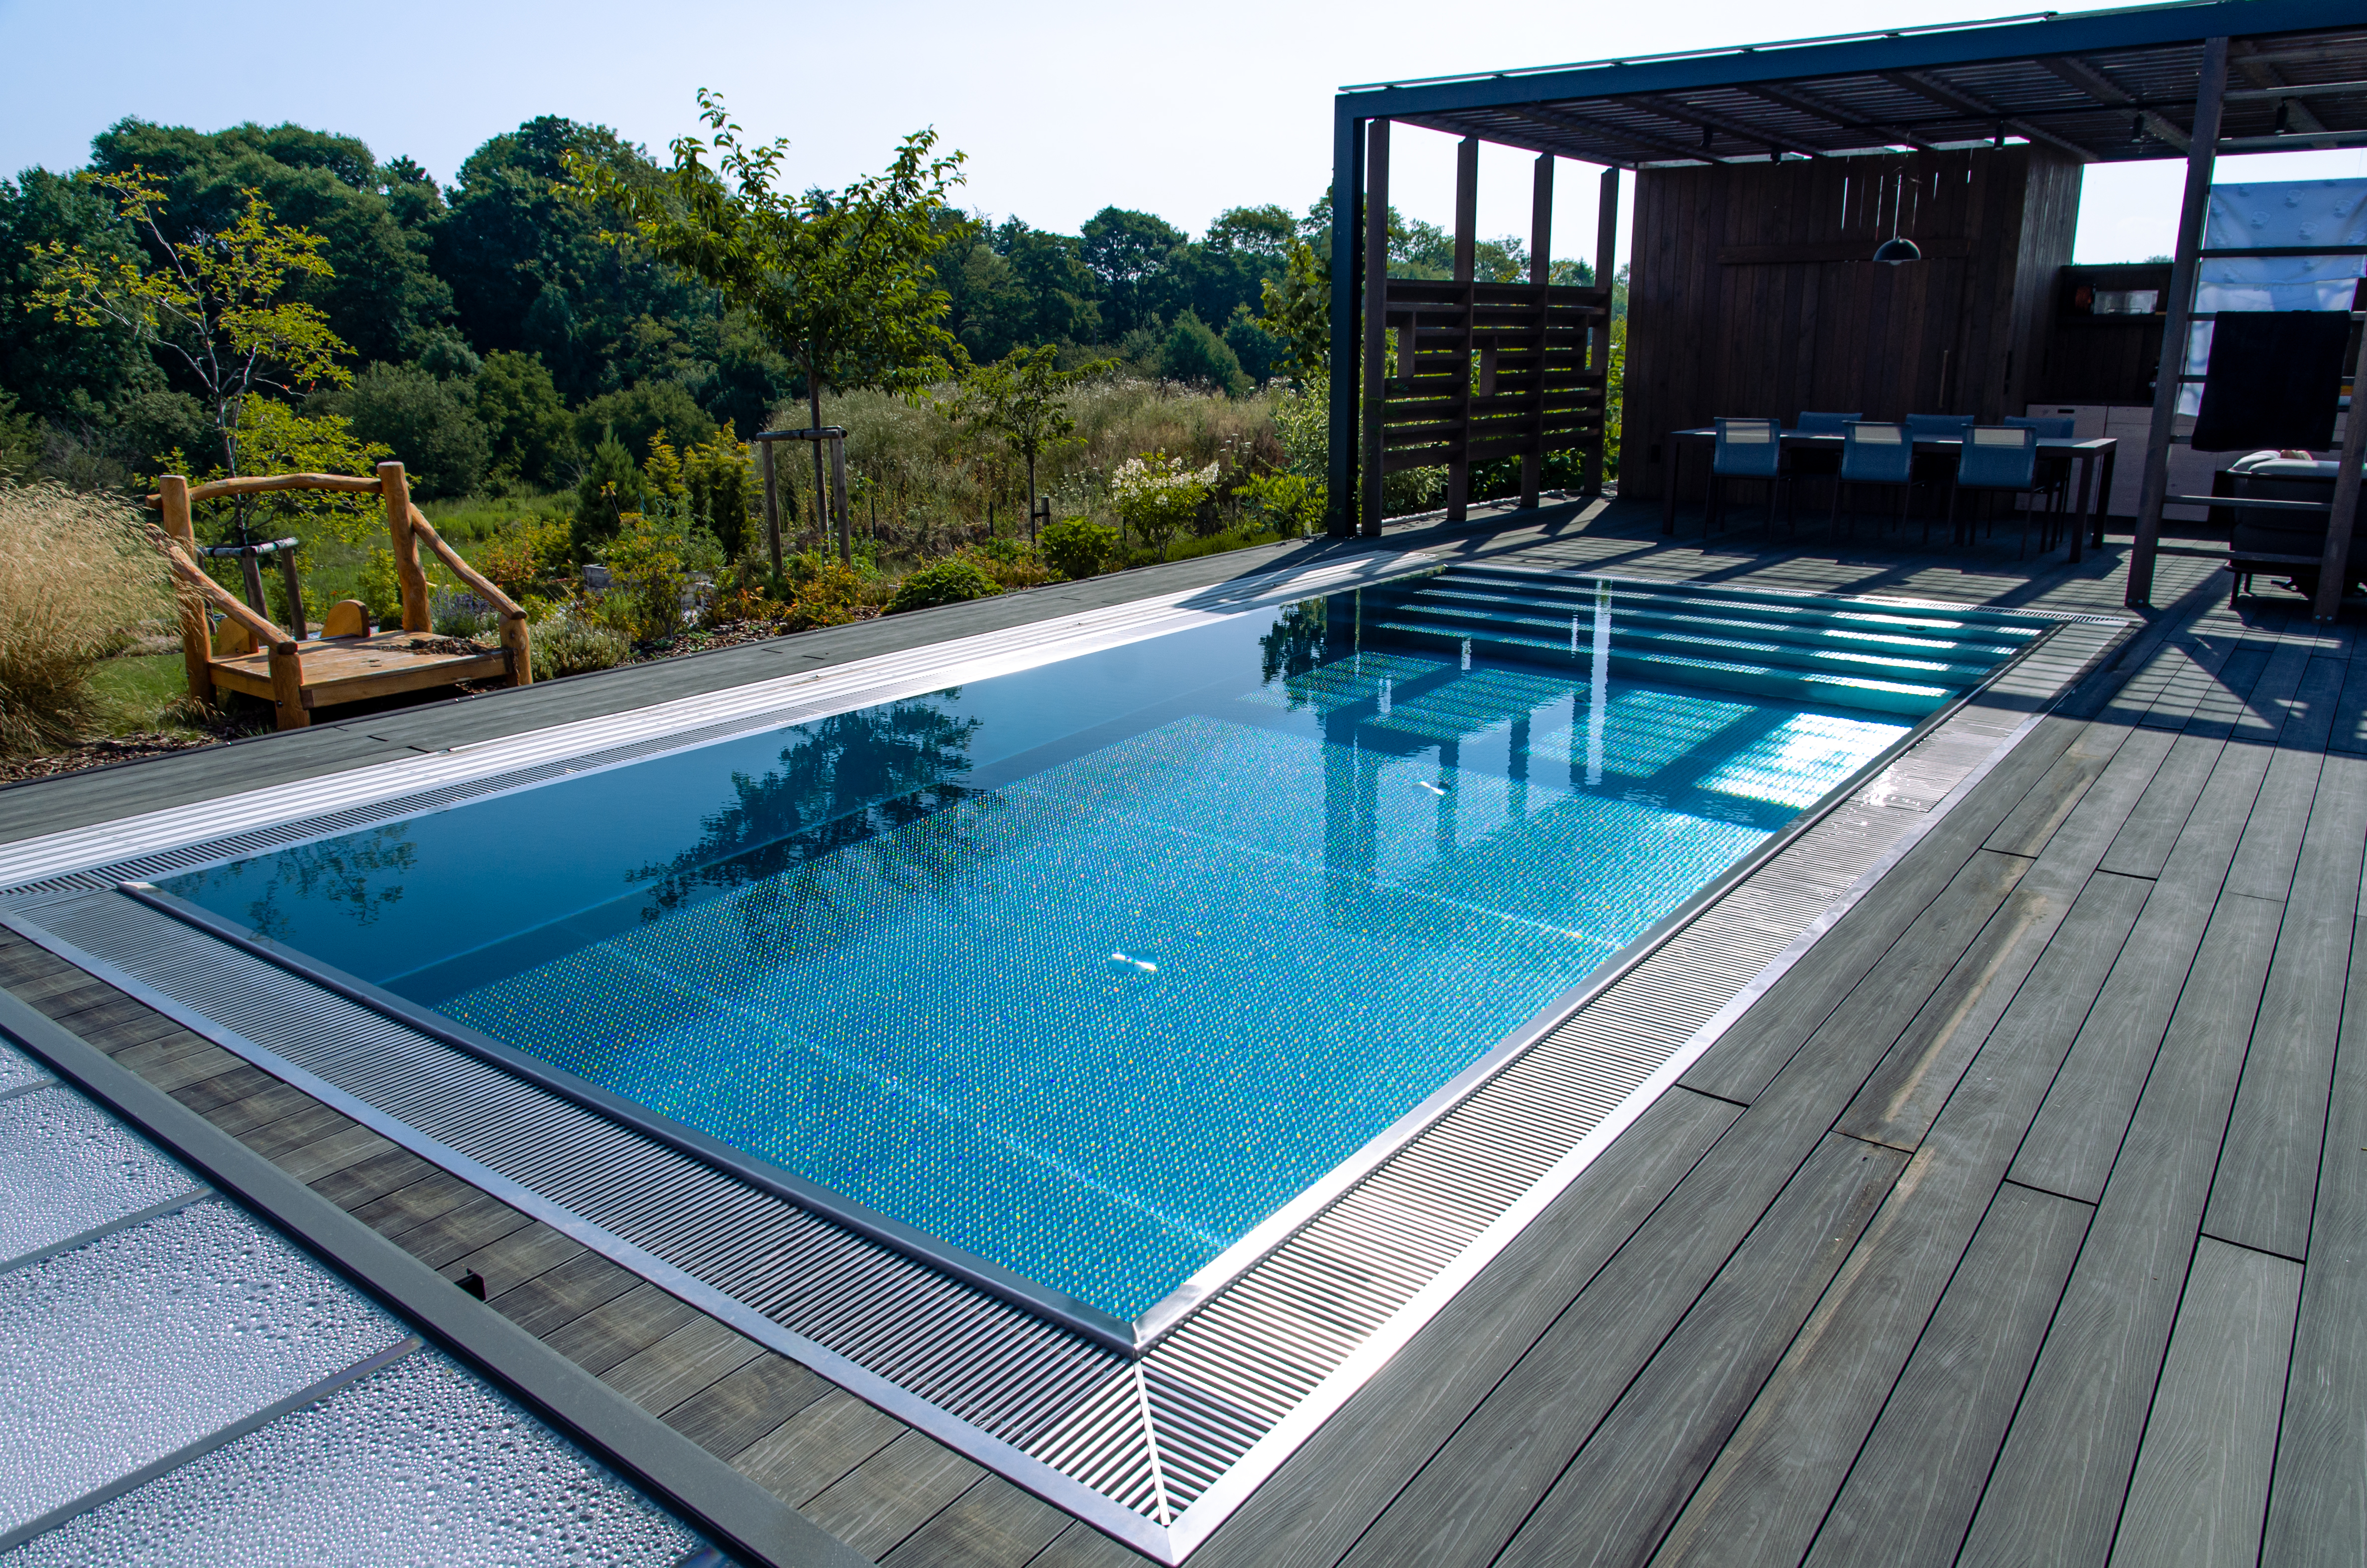 Outdoor IMAGINOX pool with wide entrance stairs